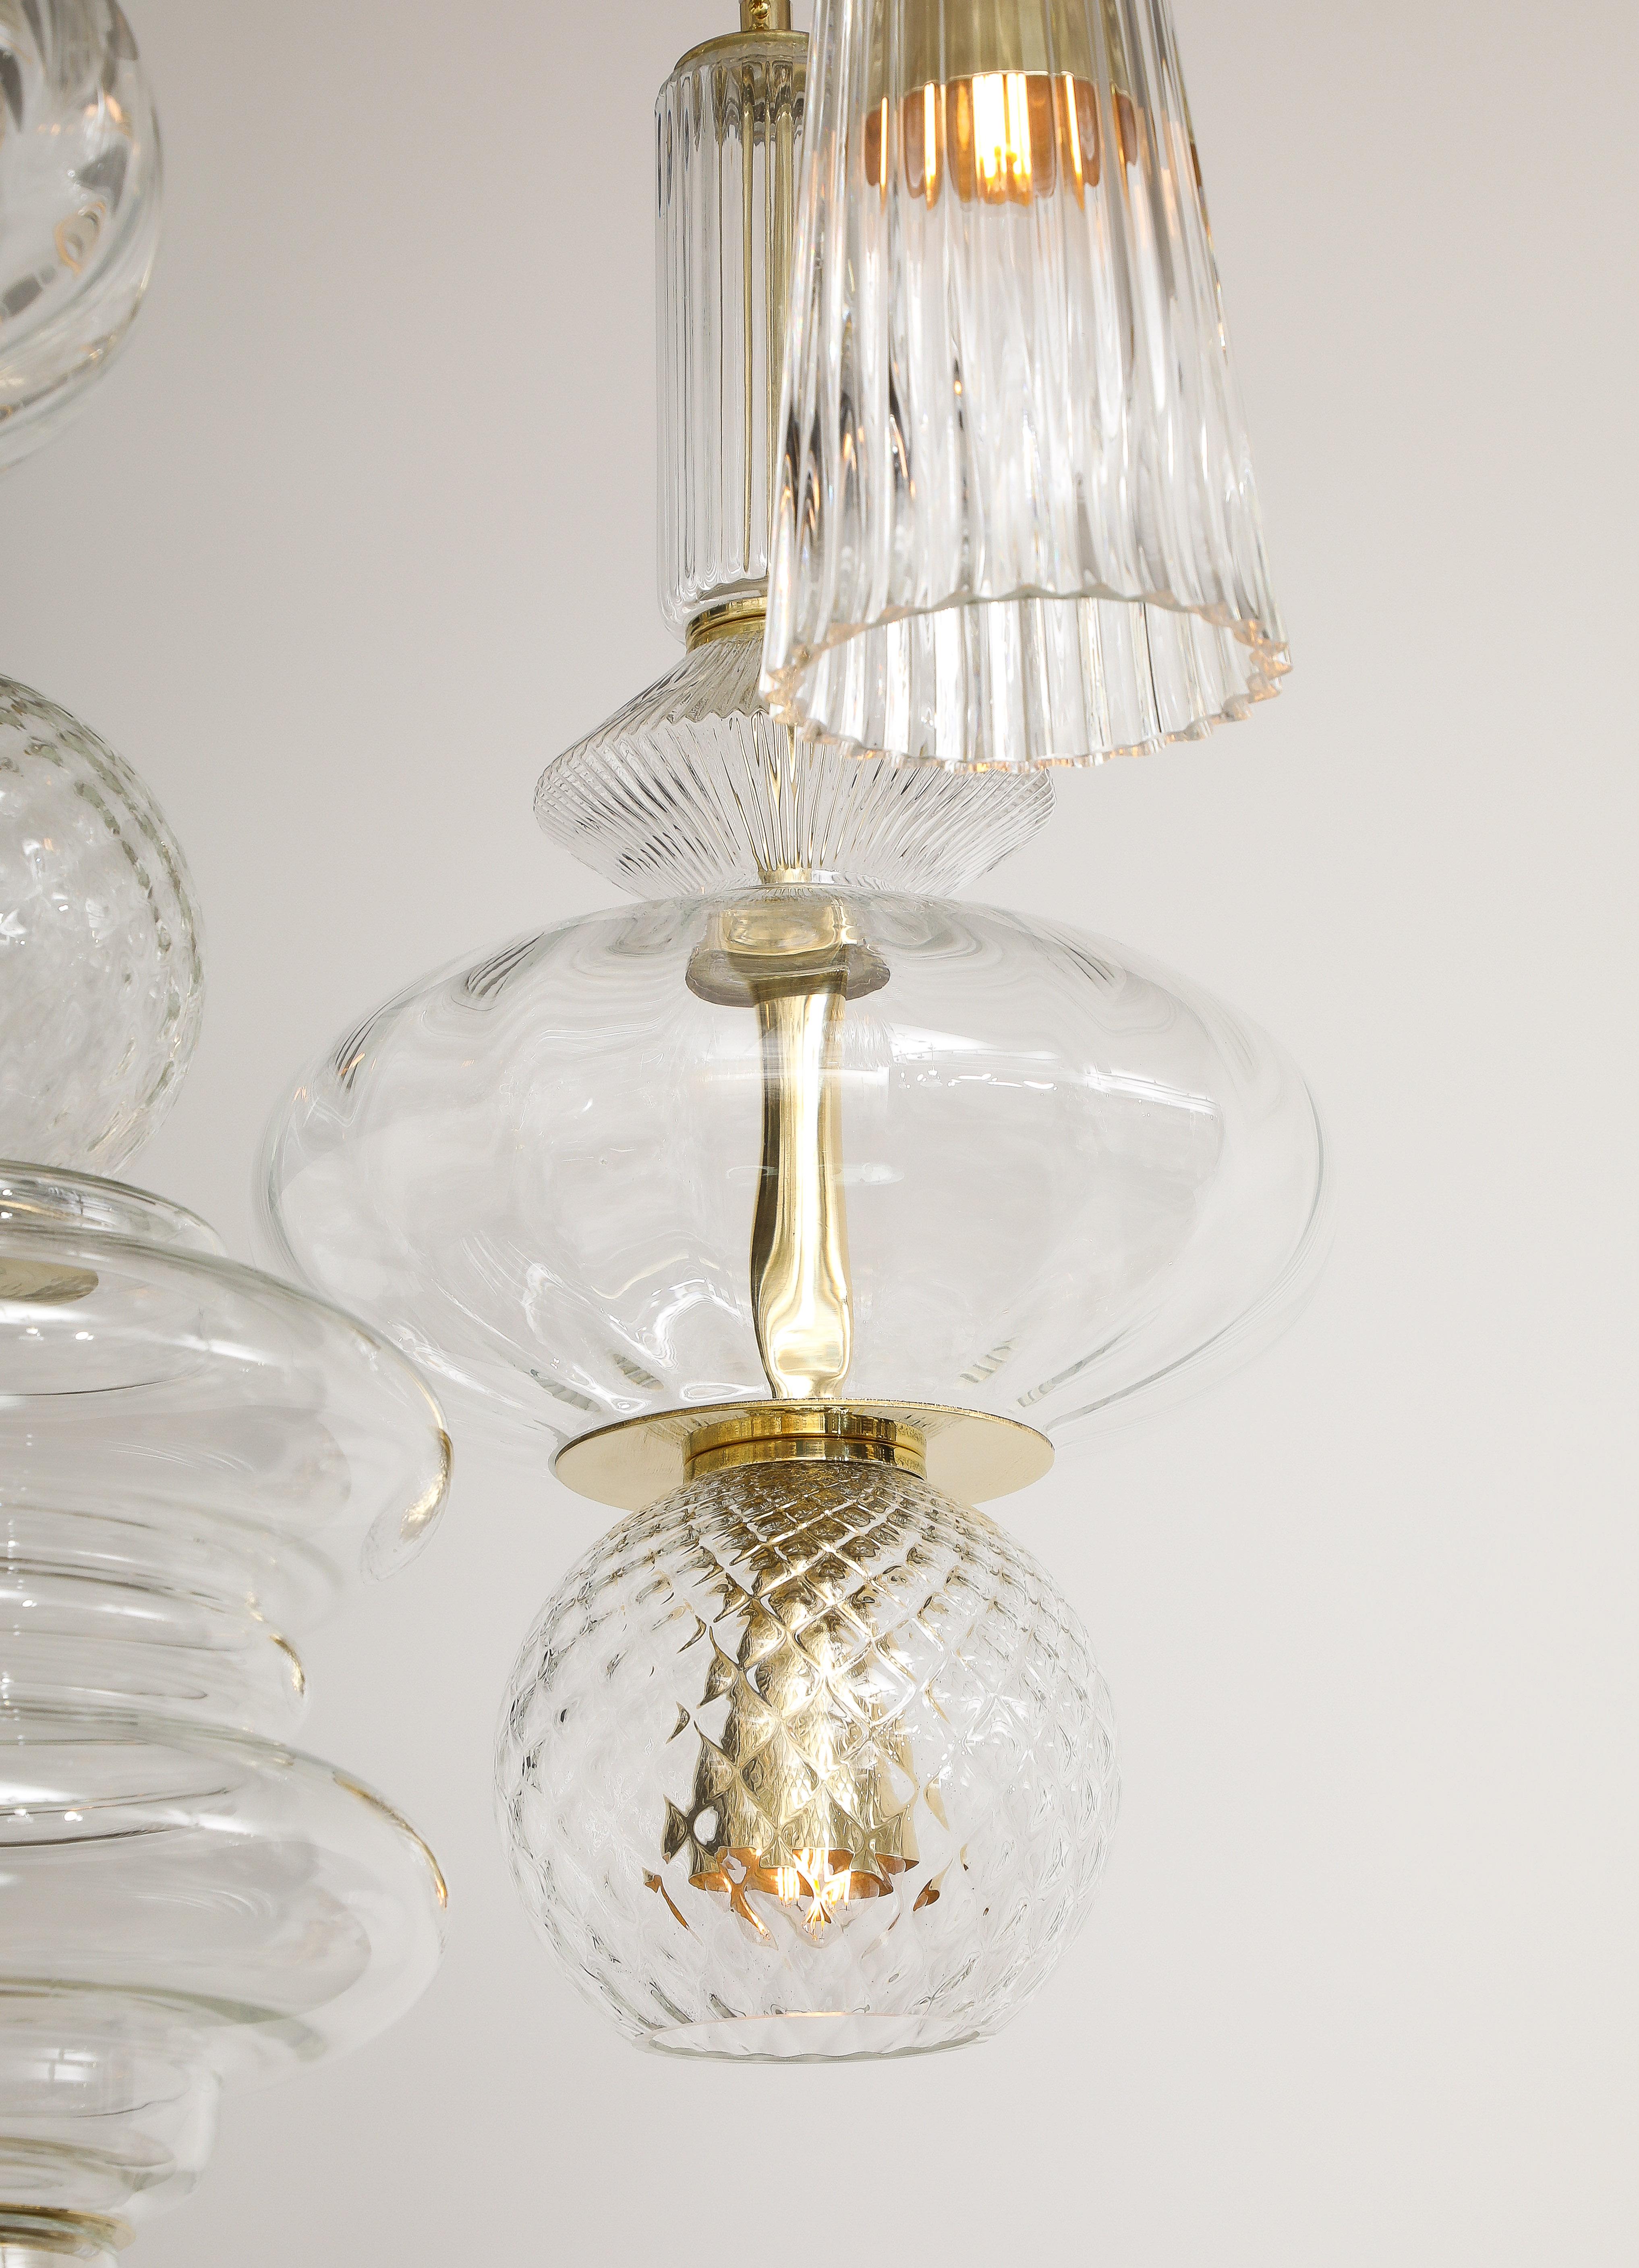 Bespoke Clear Murano Glass Pendants with Brass Suspension Chandelier, Italy In New Condition For Sale In New York, NY